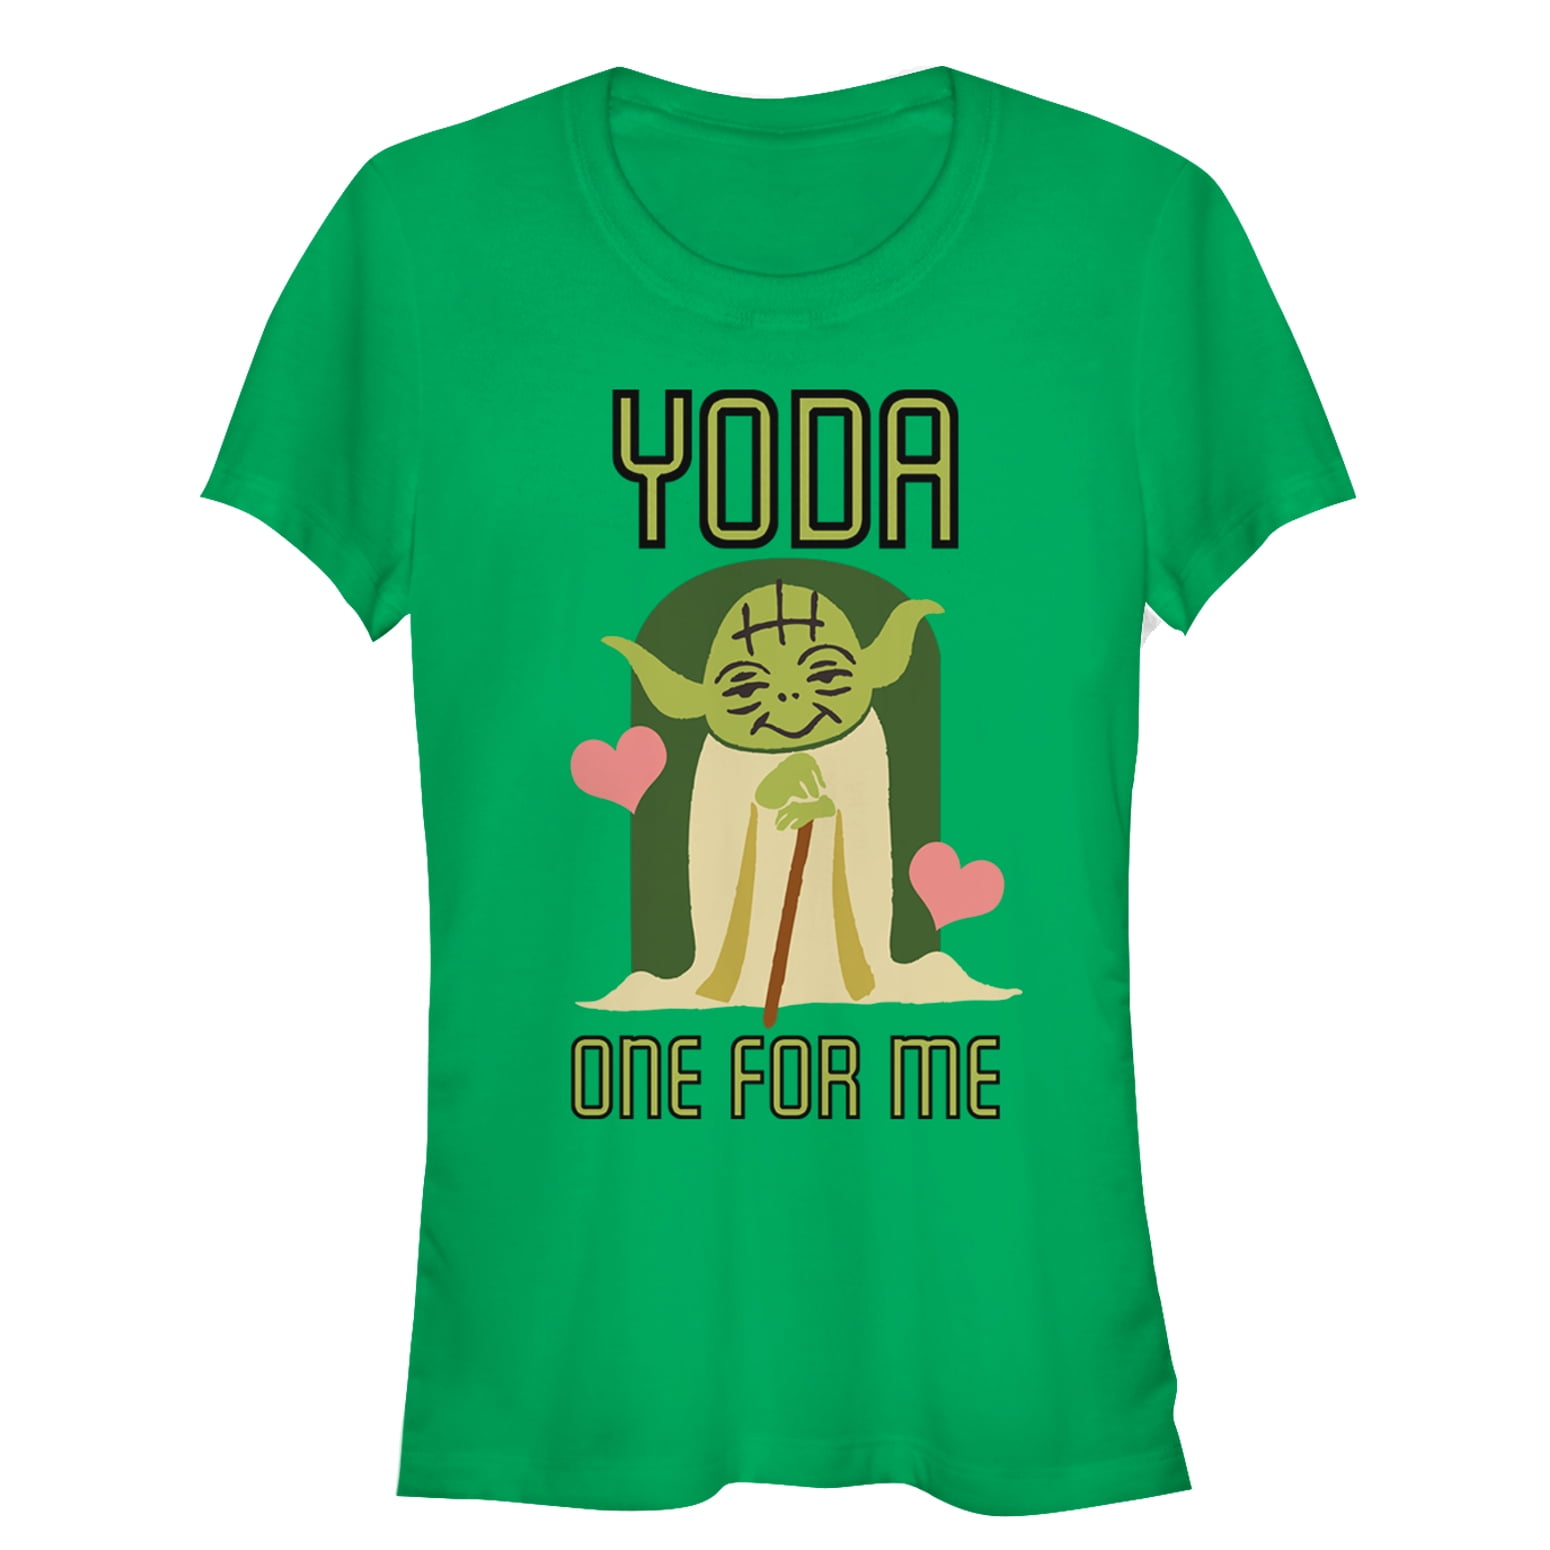 yoda one for me shirt